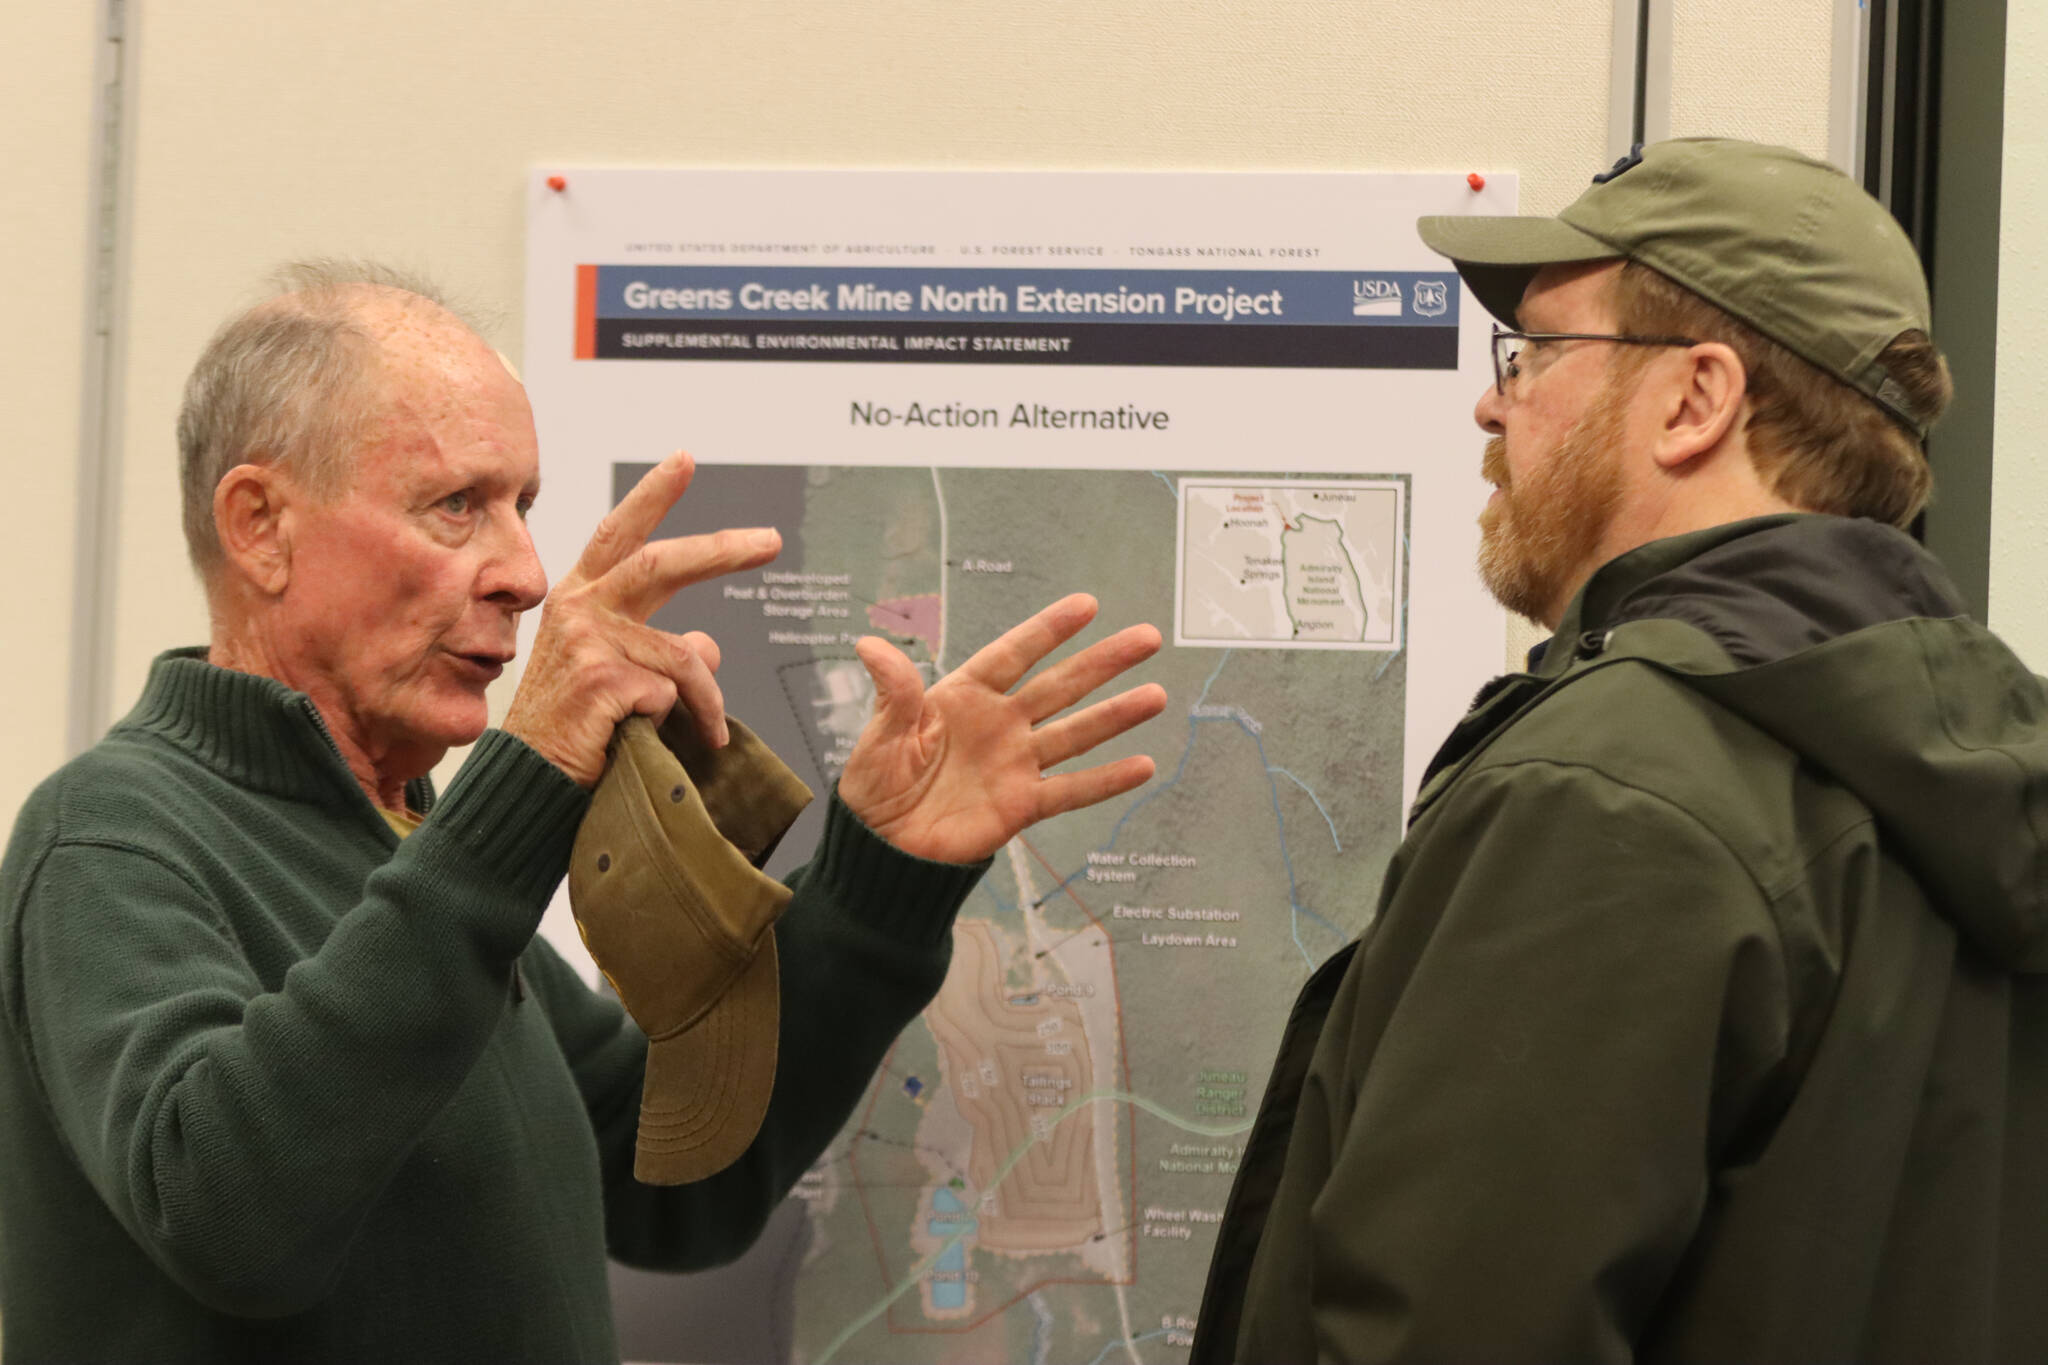 Chief civil engineer with Greens Creek Mine David Landes answers questions from the public regarding the proposed North Extension Project at Hecla Greens Creek Mine on Wednesday during an open house at the Juneau Ranger District. (Jonson Kuhn / Juneau Empire)